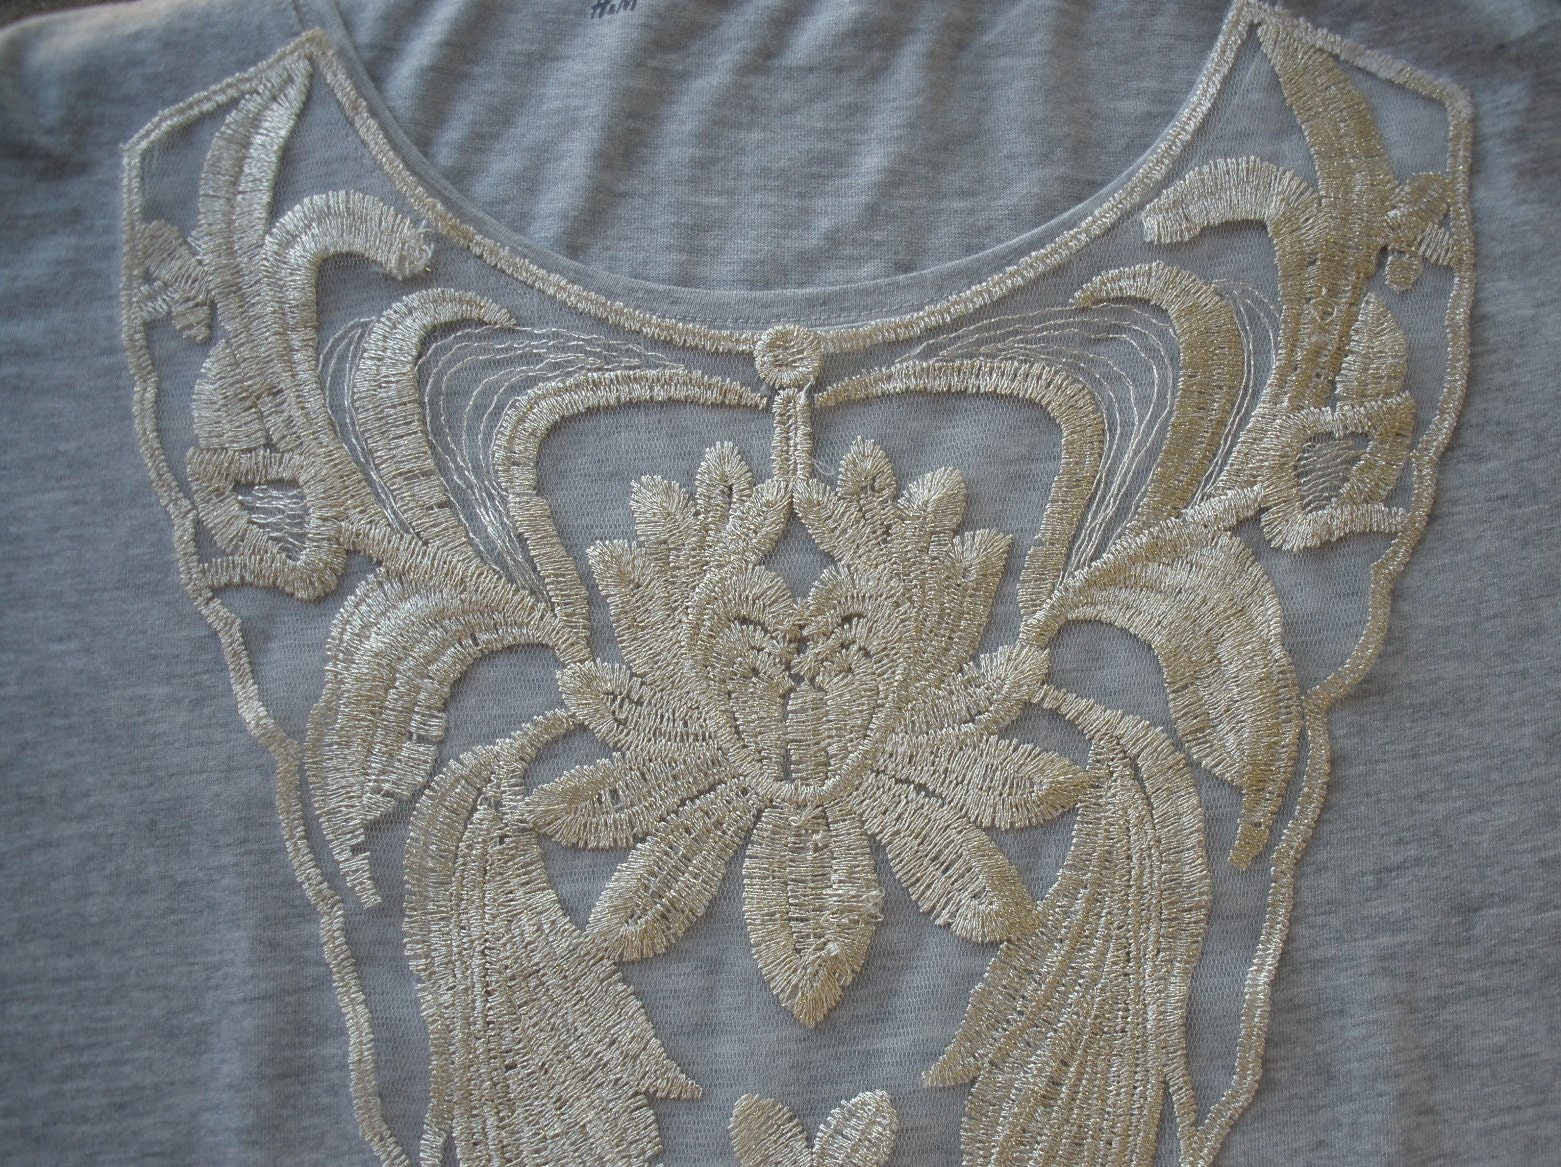 Metallic Light Gold Embroidered Lace Neckline Applique - Etsy